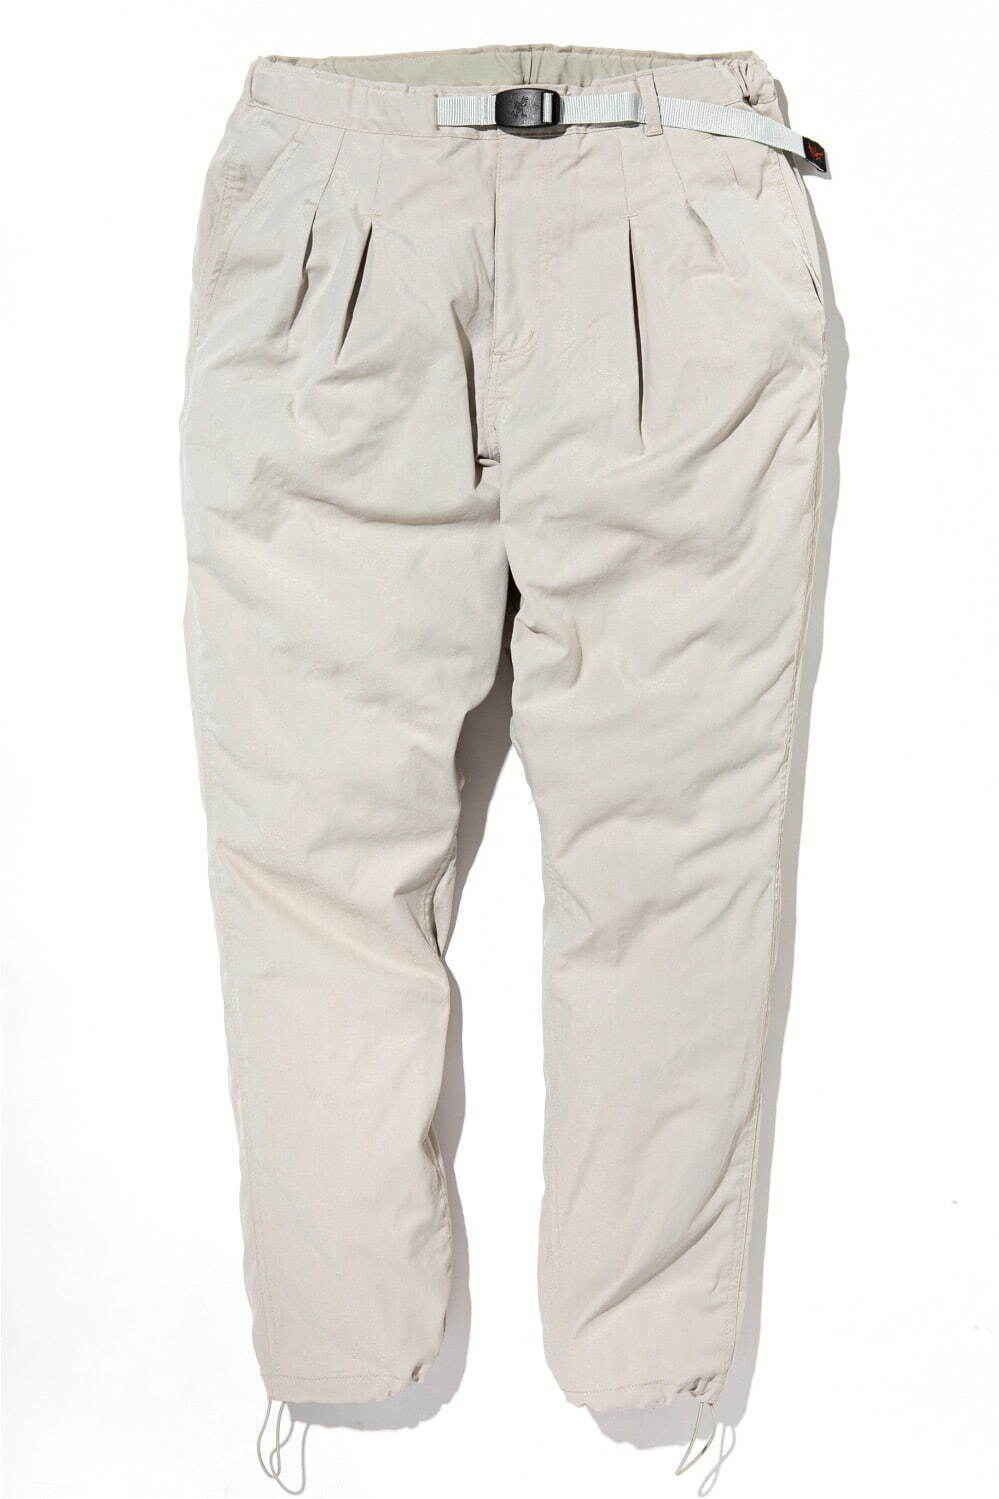 WALKER EASY PANTS POLY TWILL STRETCH COOLMAX 27,280円